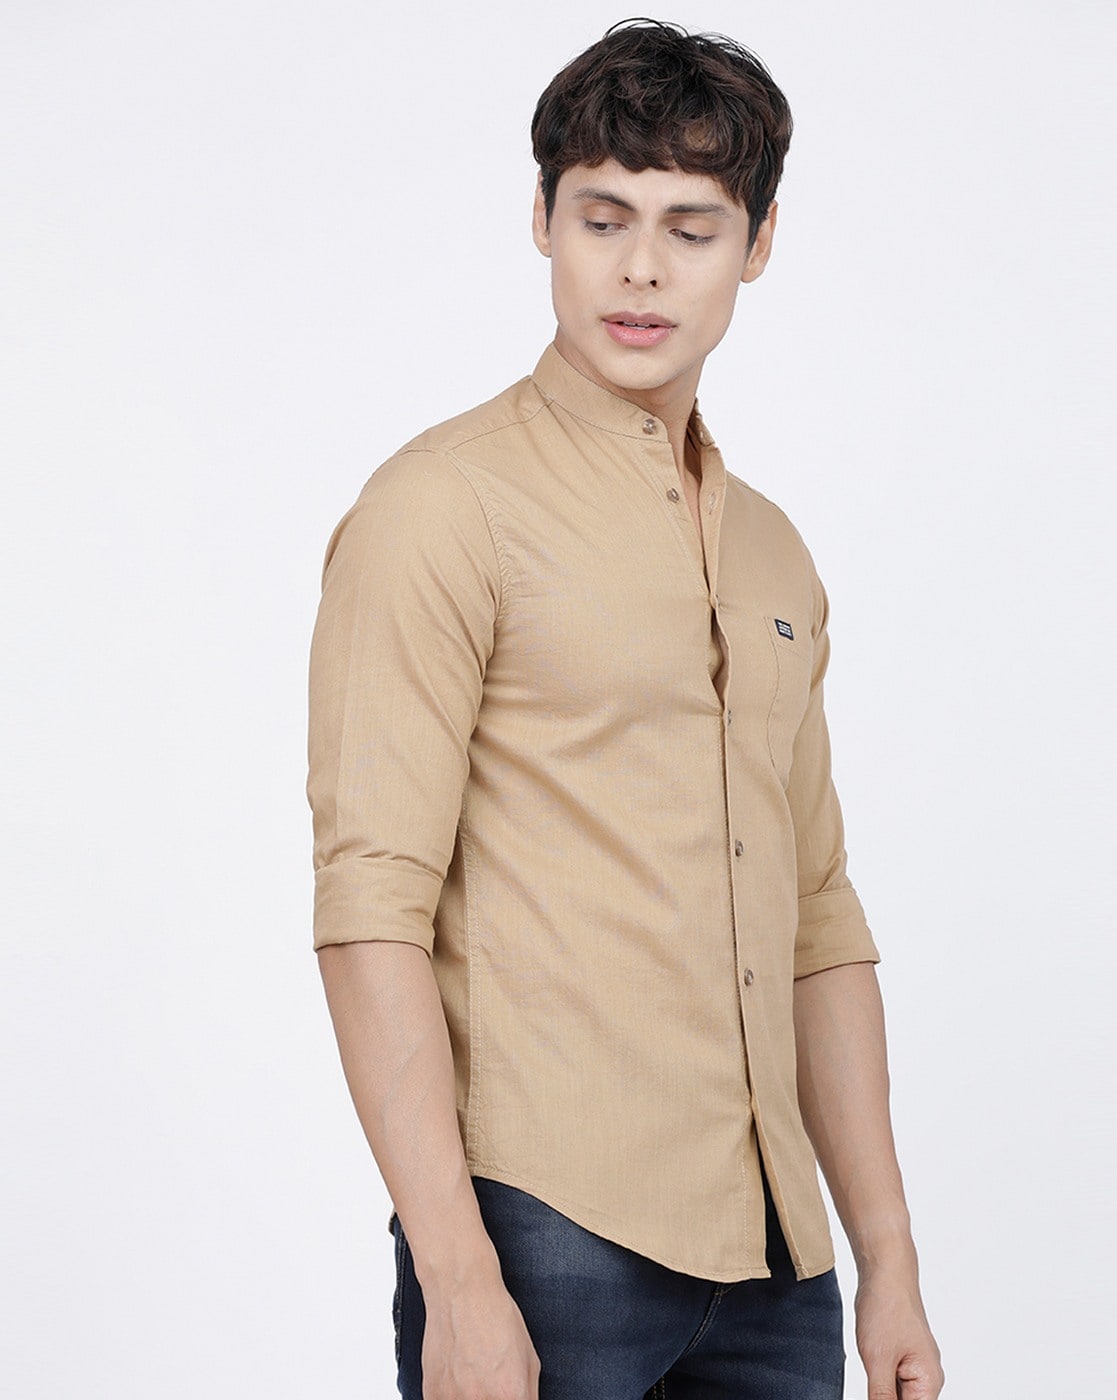 Buy The Ash Grey Classic Shirt For Men's Online | Beyours